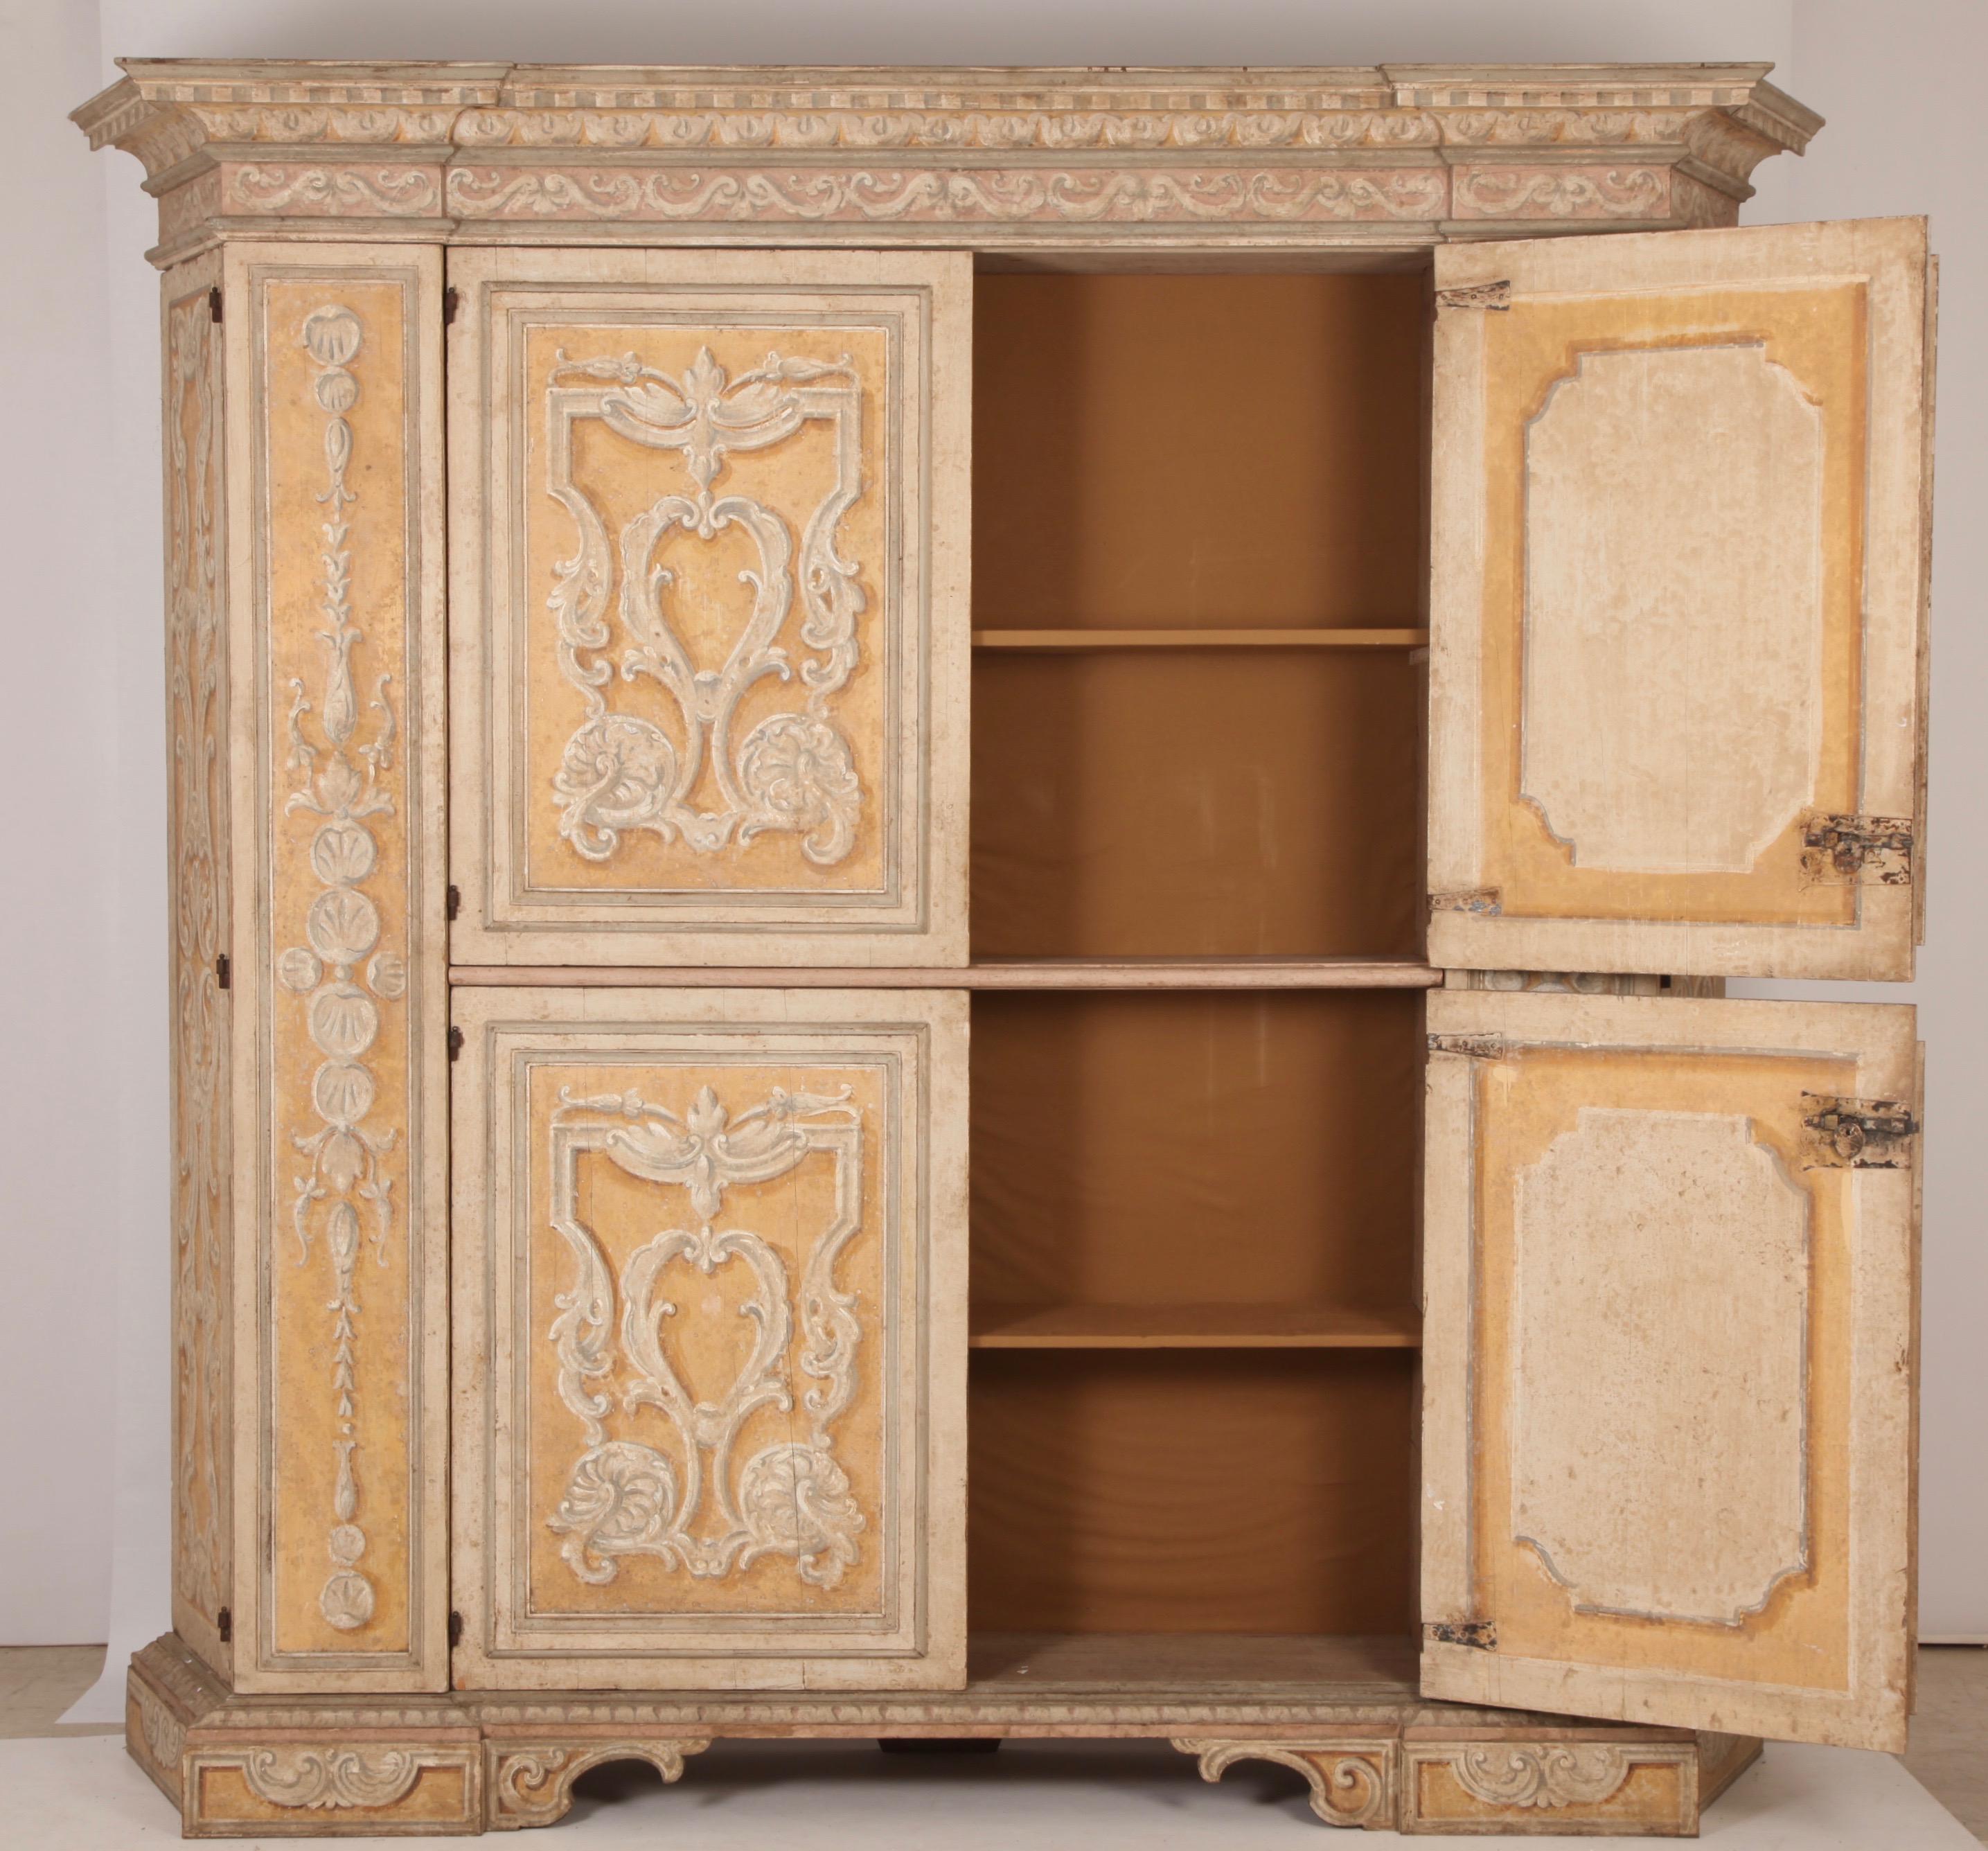 19th Century Antique Italian Painted Cabinet from Tuscany